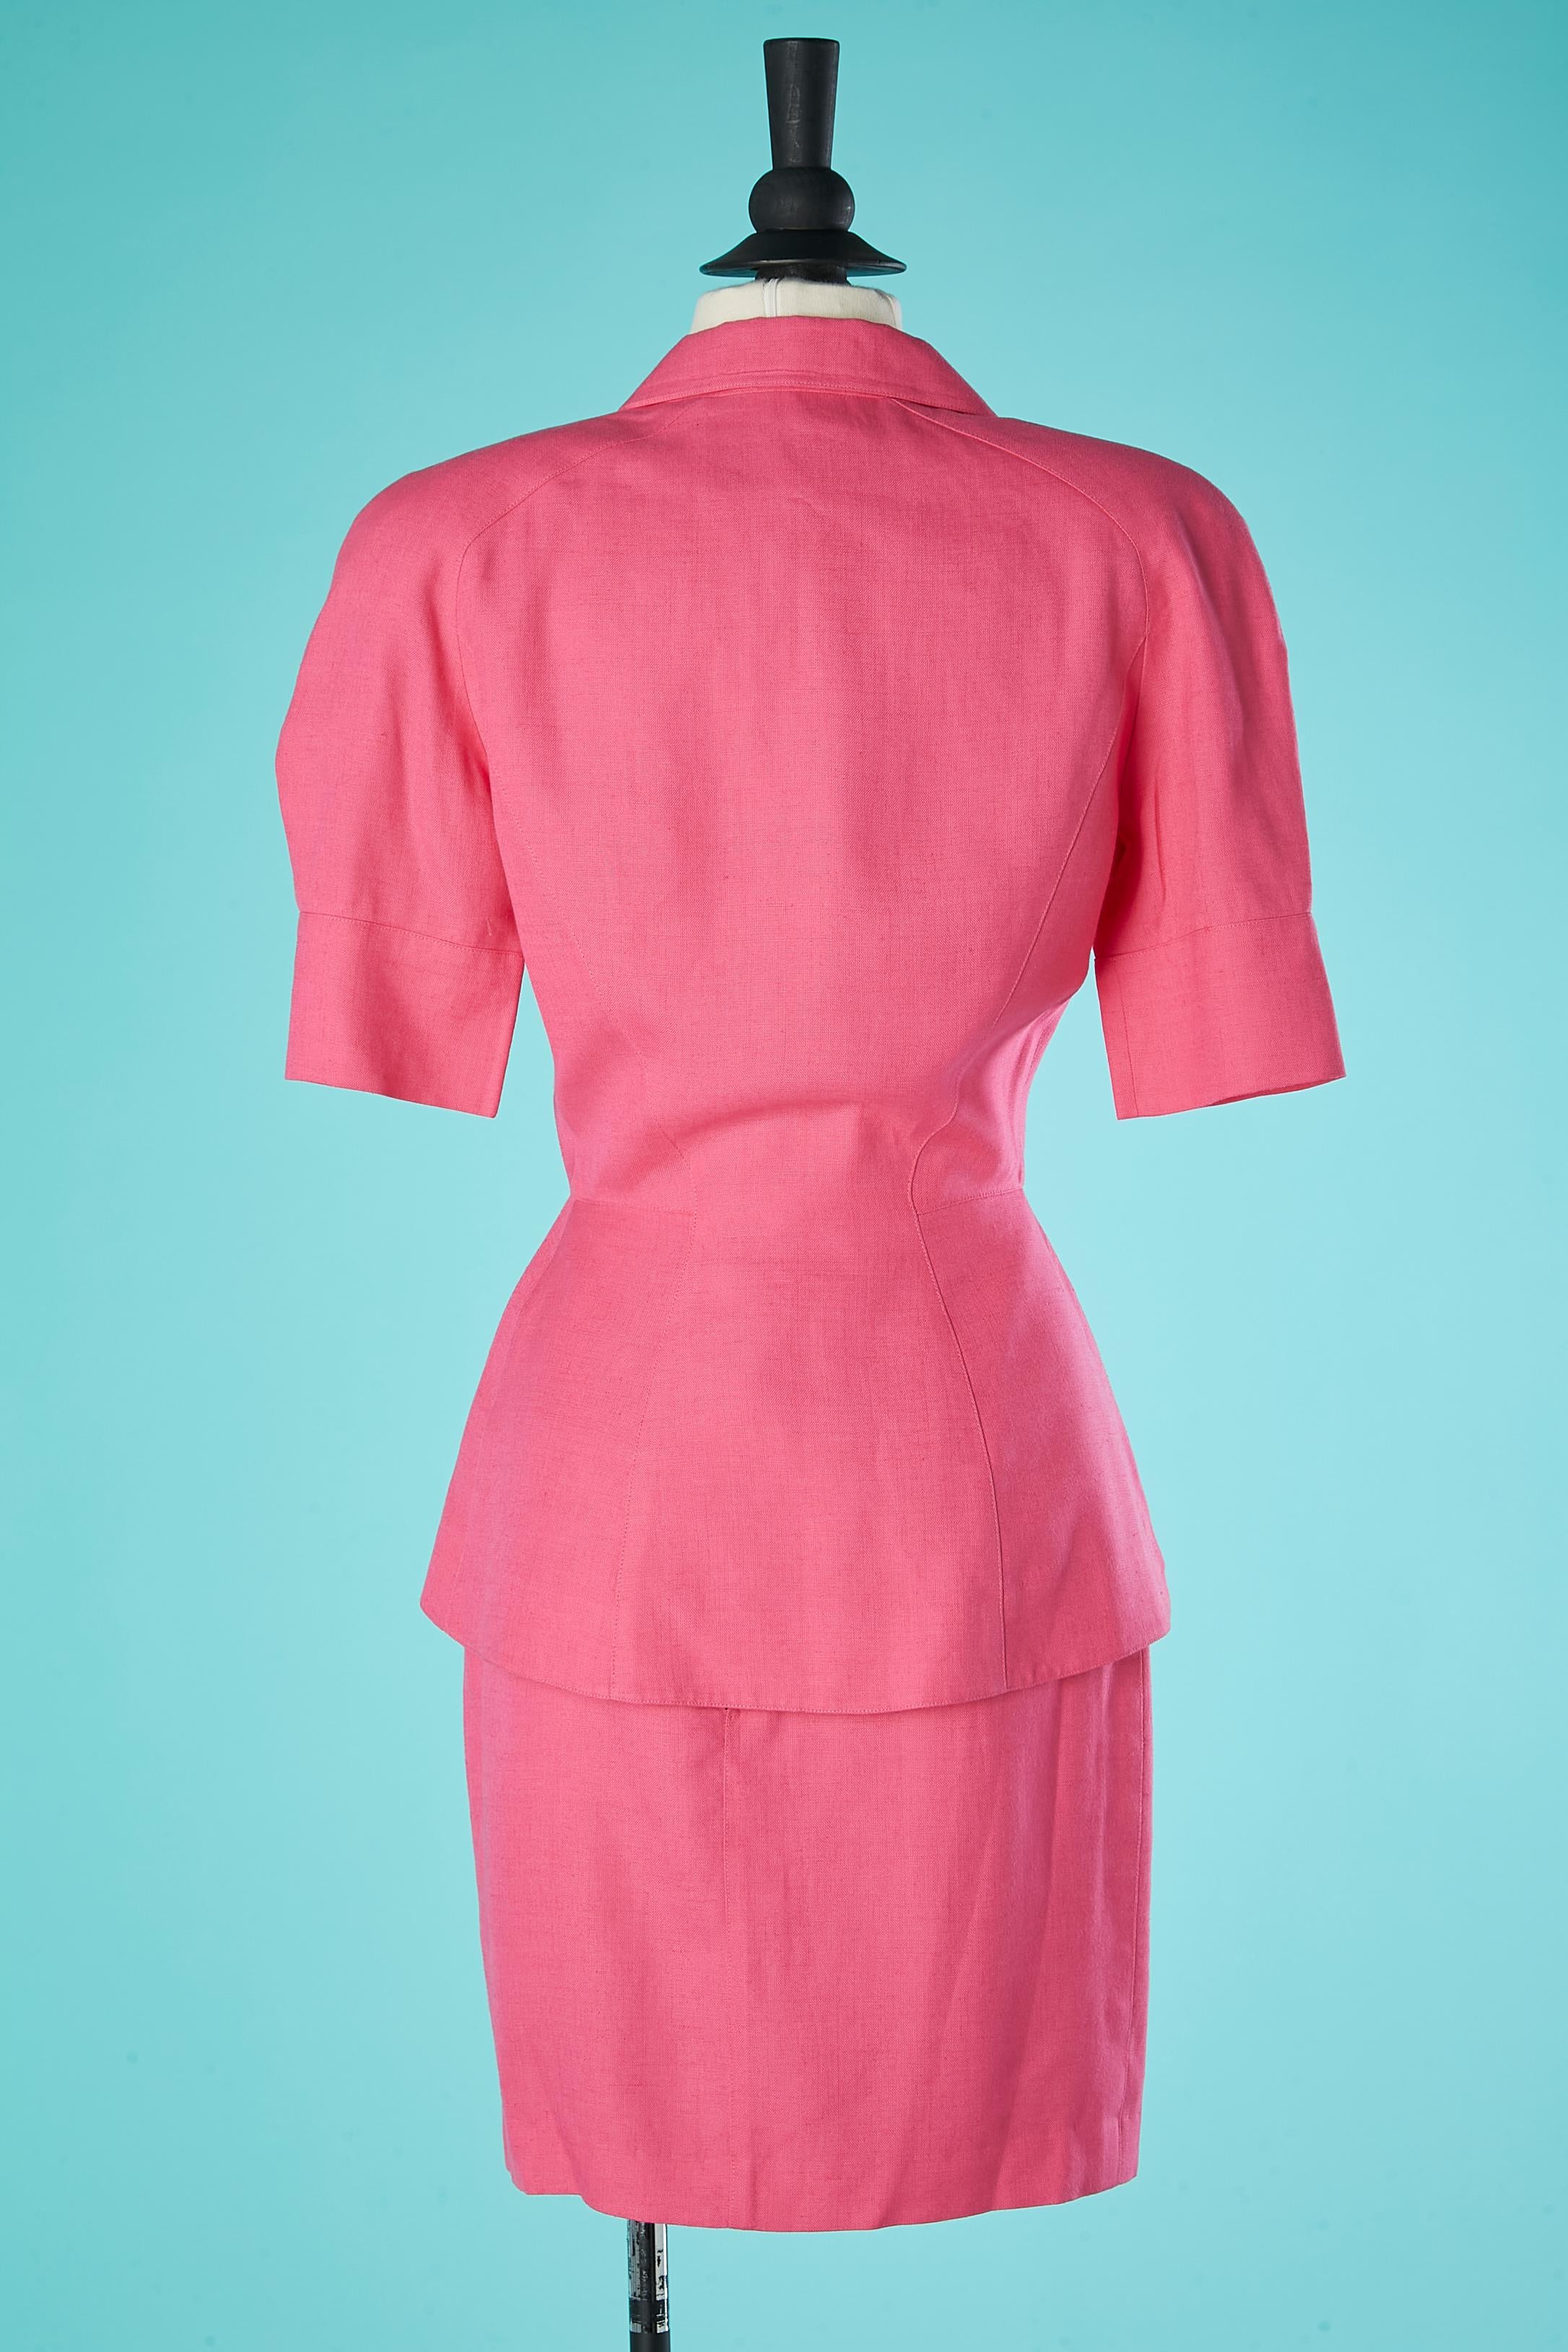 Pink skirt-suit with short sleeves and jewelery cabochon Thierry Mugler  For Sale 2